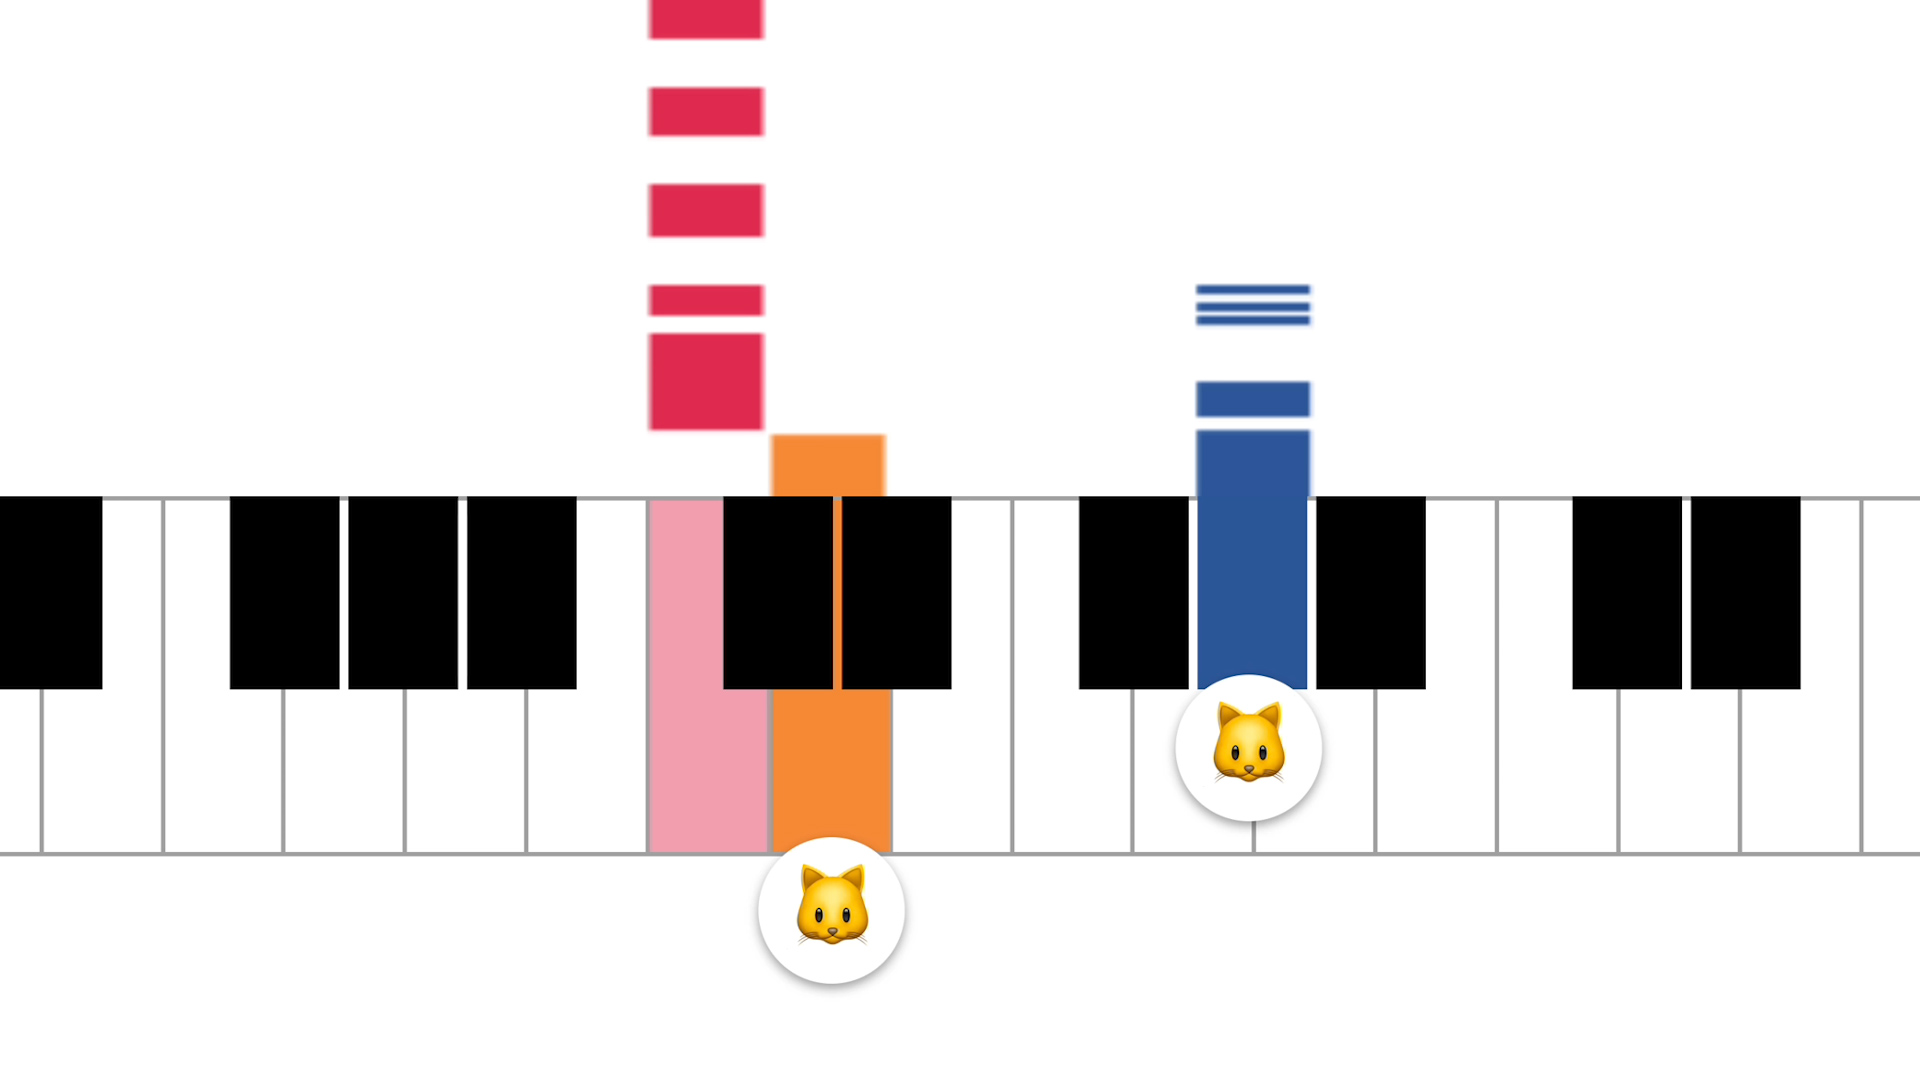 Shared Piano by Google Creative Lab - Experiments with Google